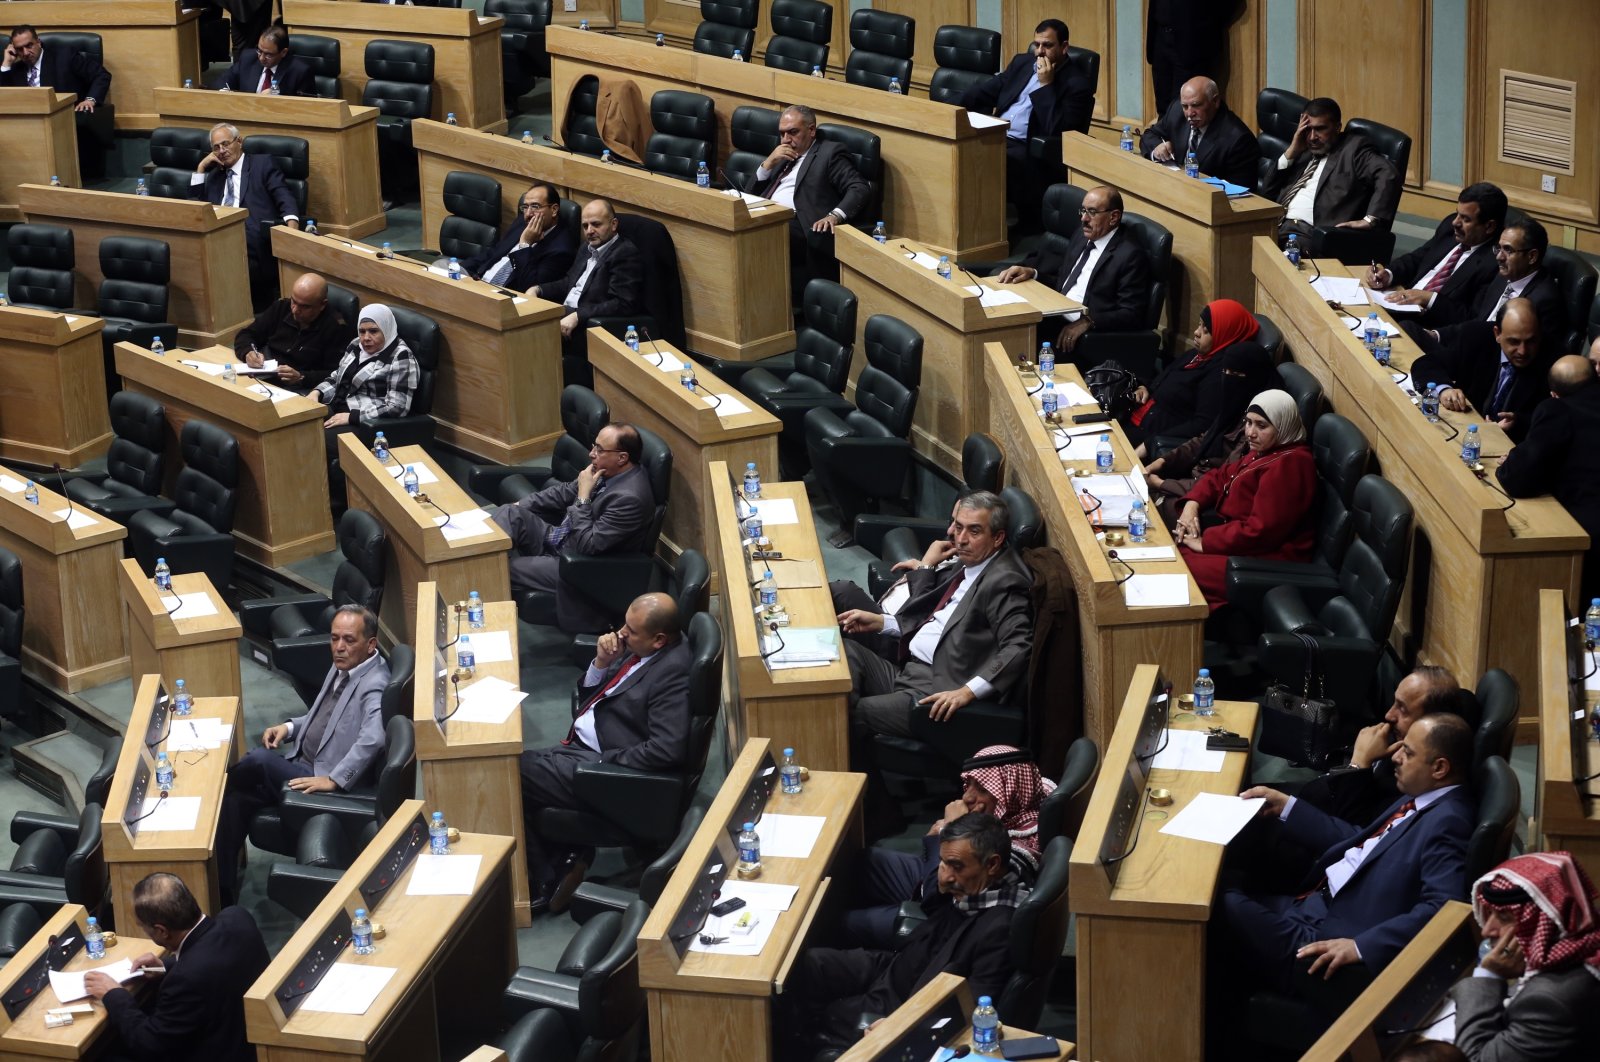 Jordanian lawmakers attend the second day of a heated debate on the U.S. push for a peace deal between Israelis and Palestinians, under the domed parliament chamber in the capital, Amman, Jordan, Feb. 4, 2014. (AP File Photo)